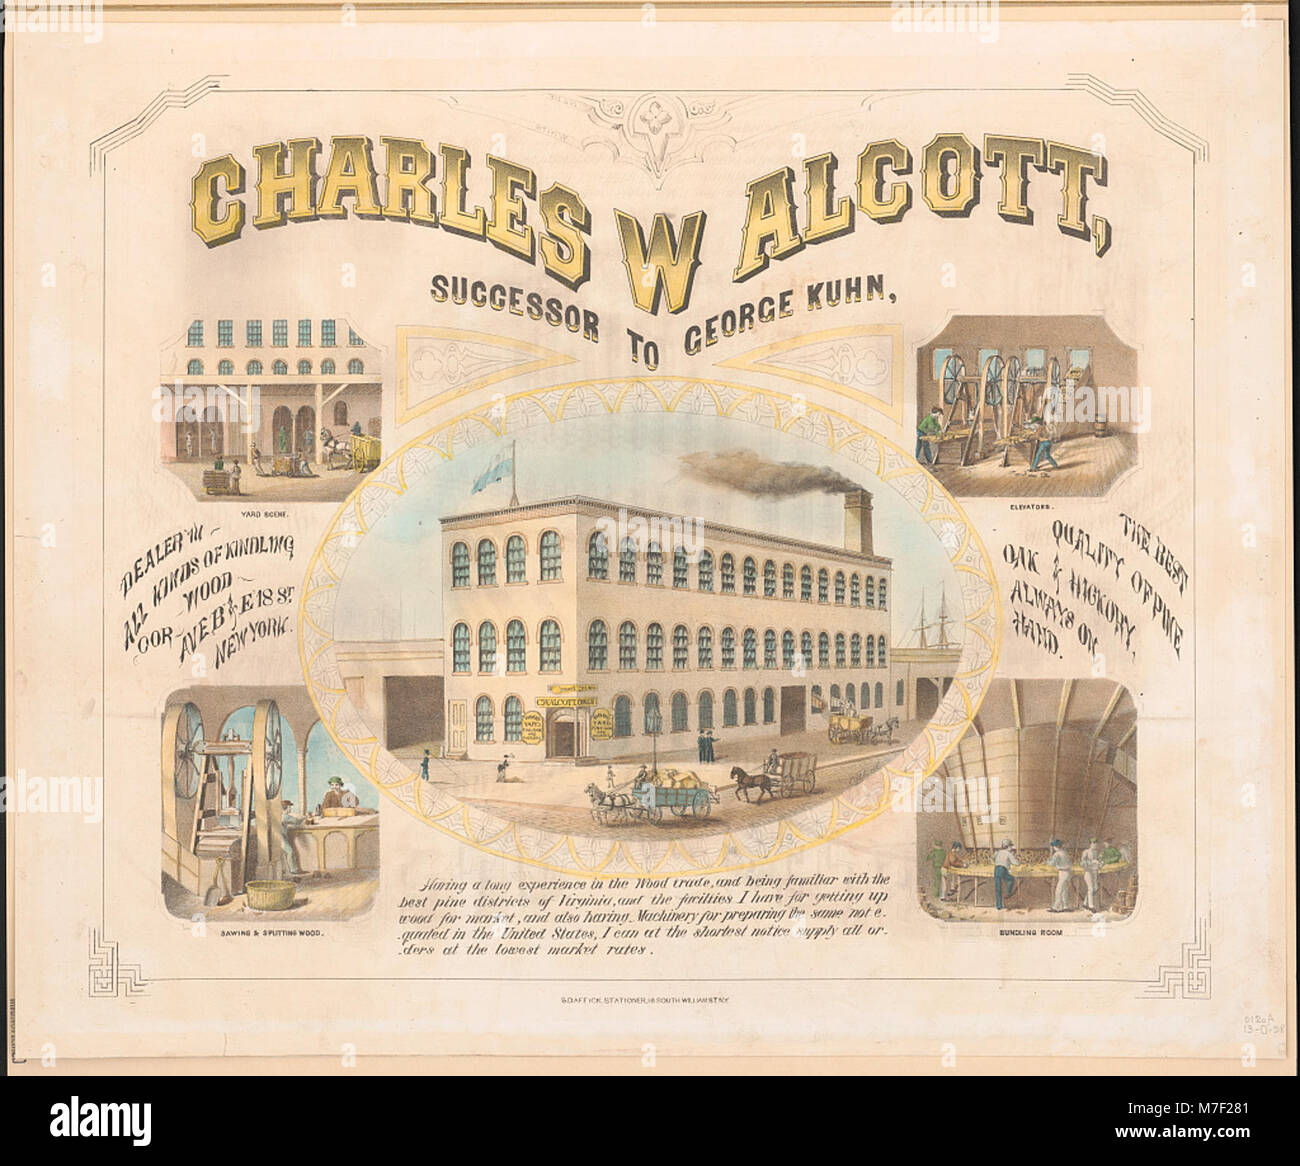 Charles W. Alcott, successor to George Kuhn, dealer in all kins of kindling wood, cor. Ave. B & E 18th St. New York - C.M. Smith. LCCN2012648935 Stock Photo